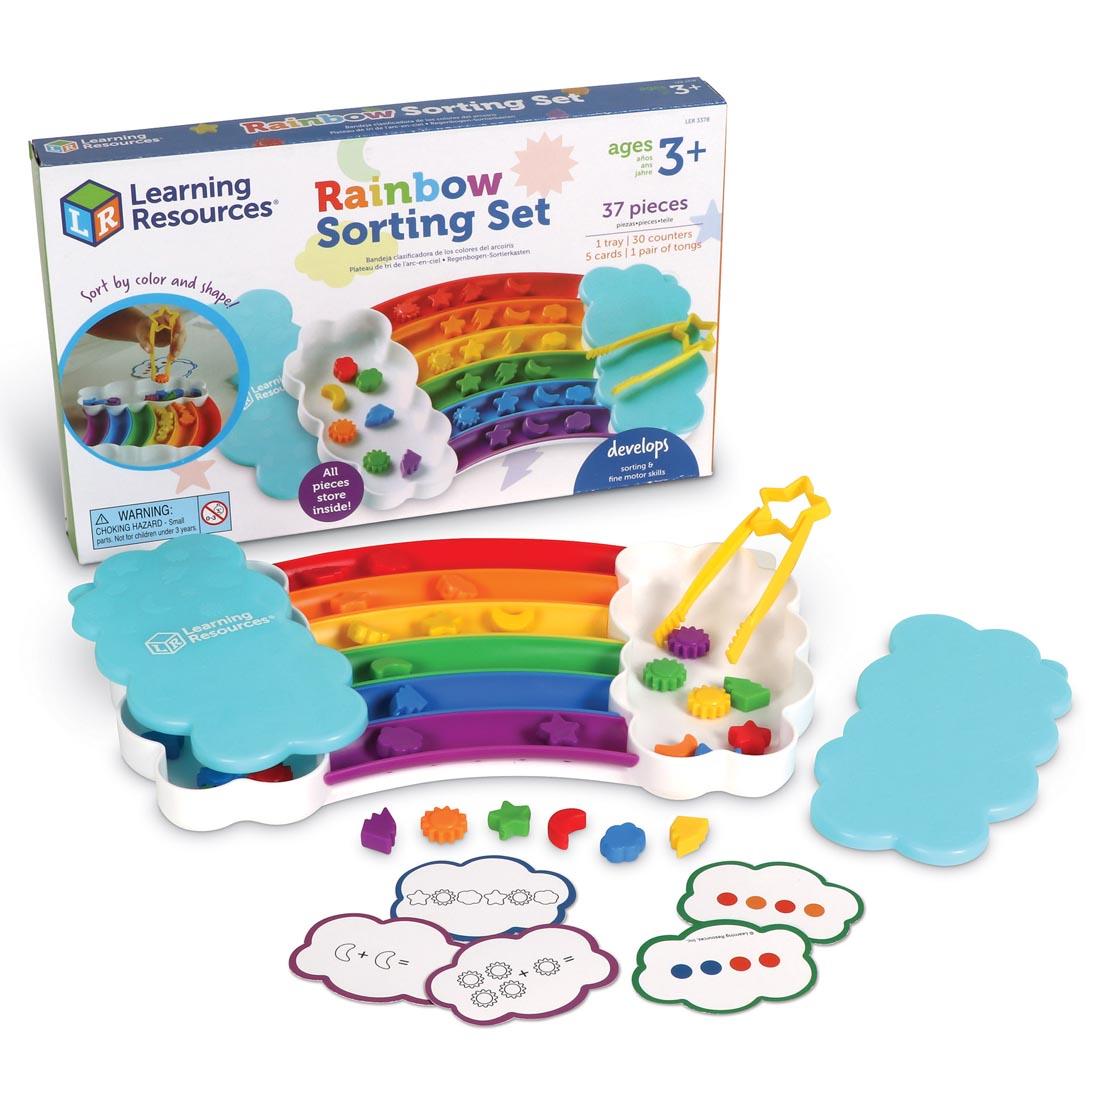 box behind all the components of the Rainbow Sorting Set By Learning Resources